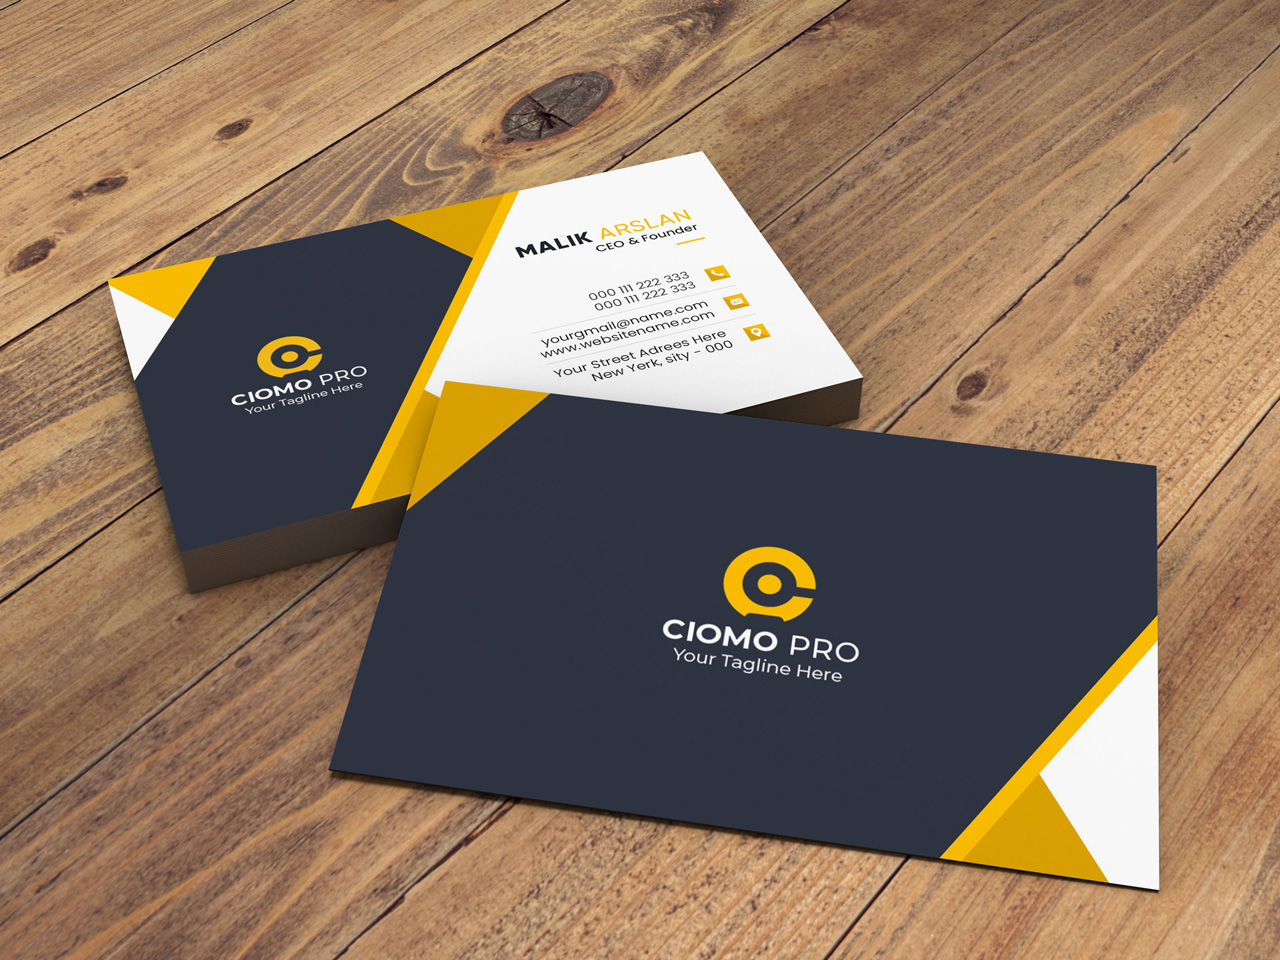 Design Creative and Professional Business Cards